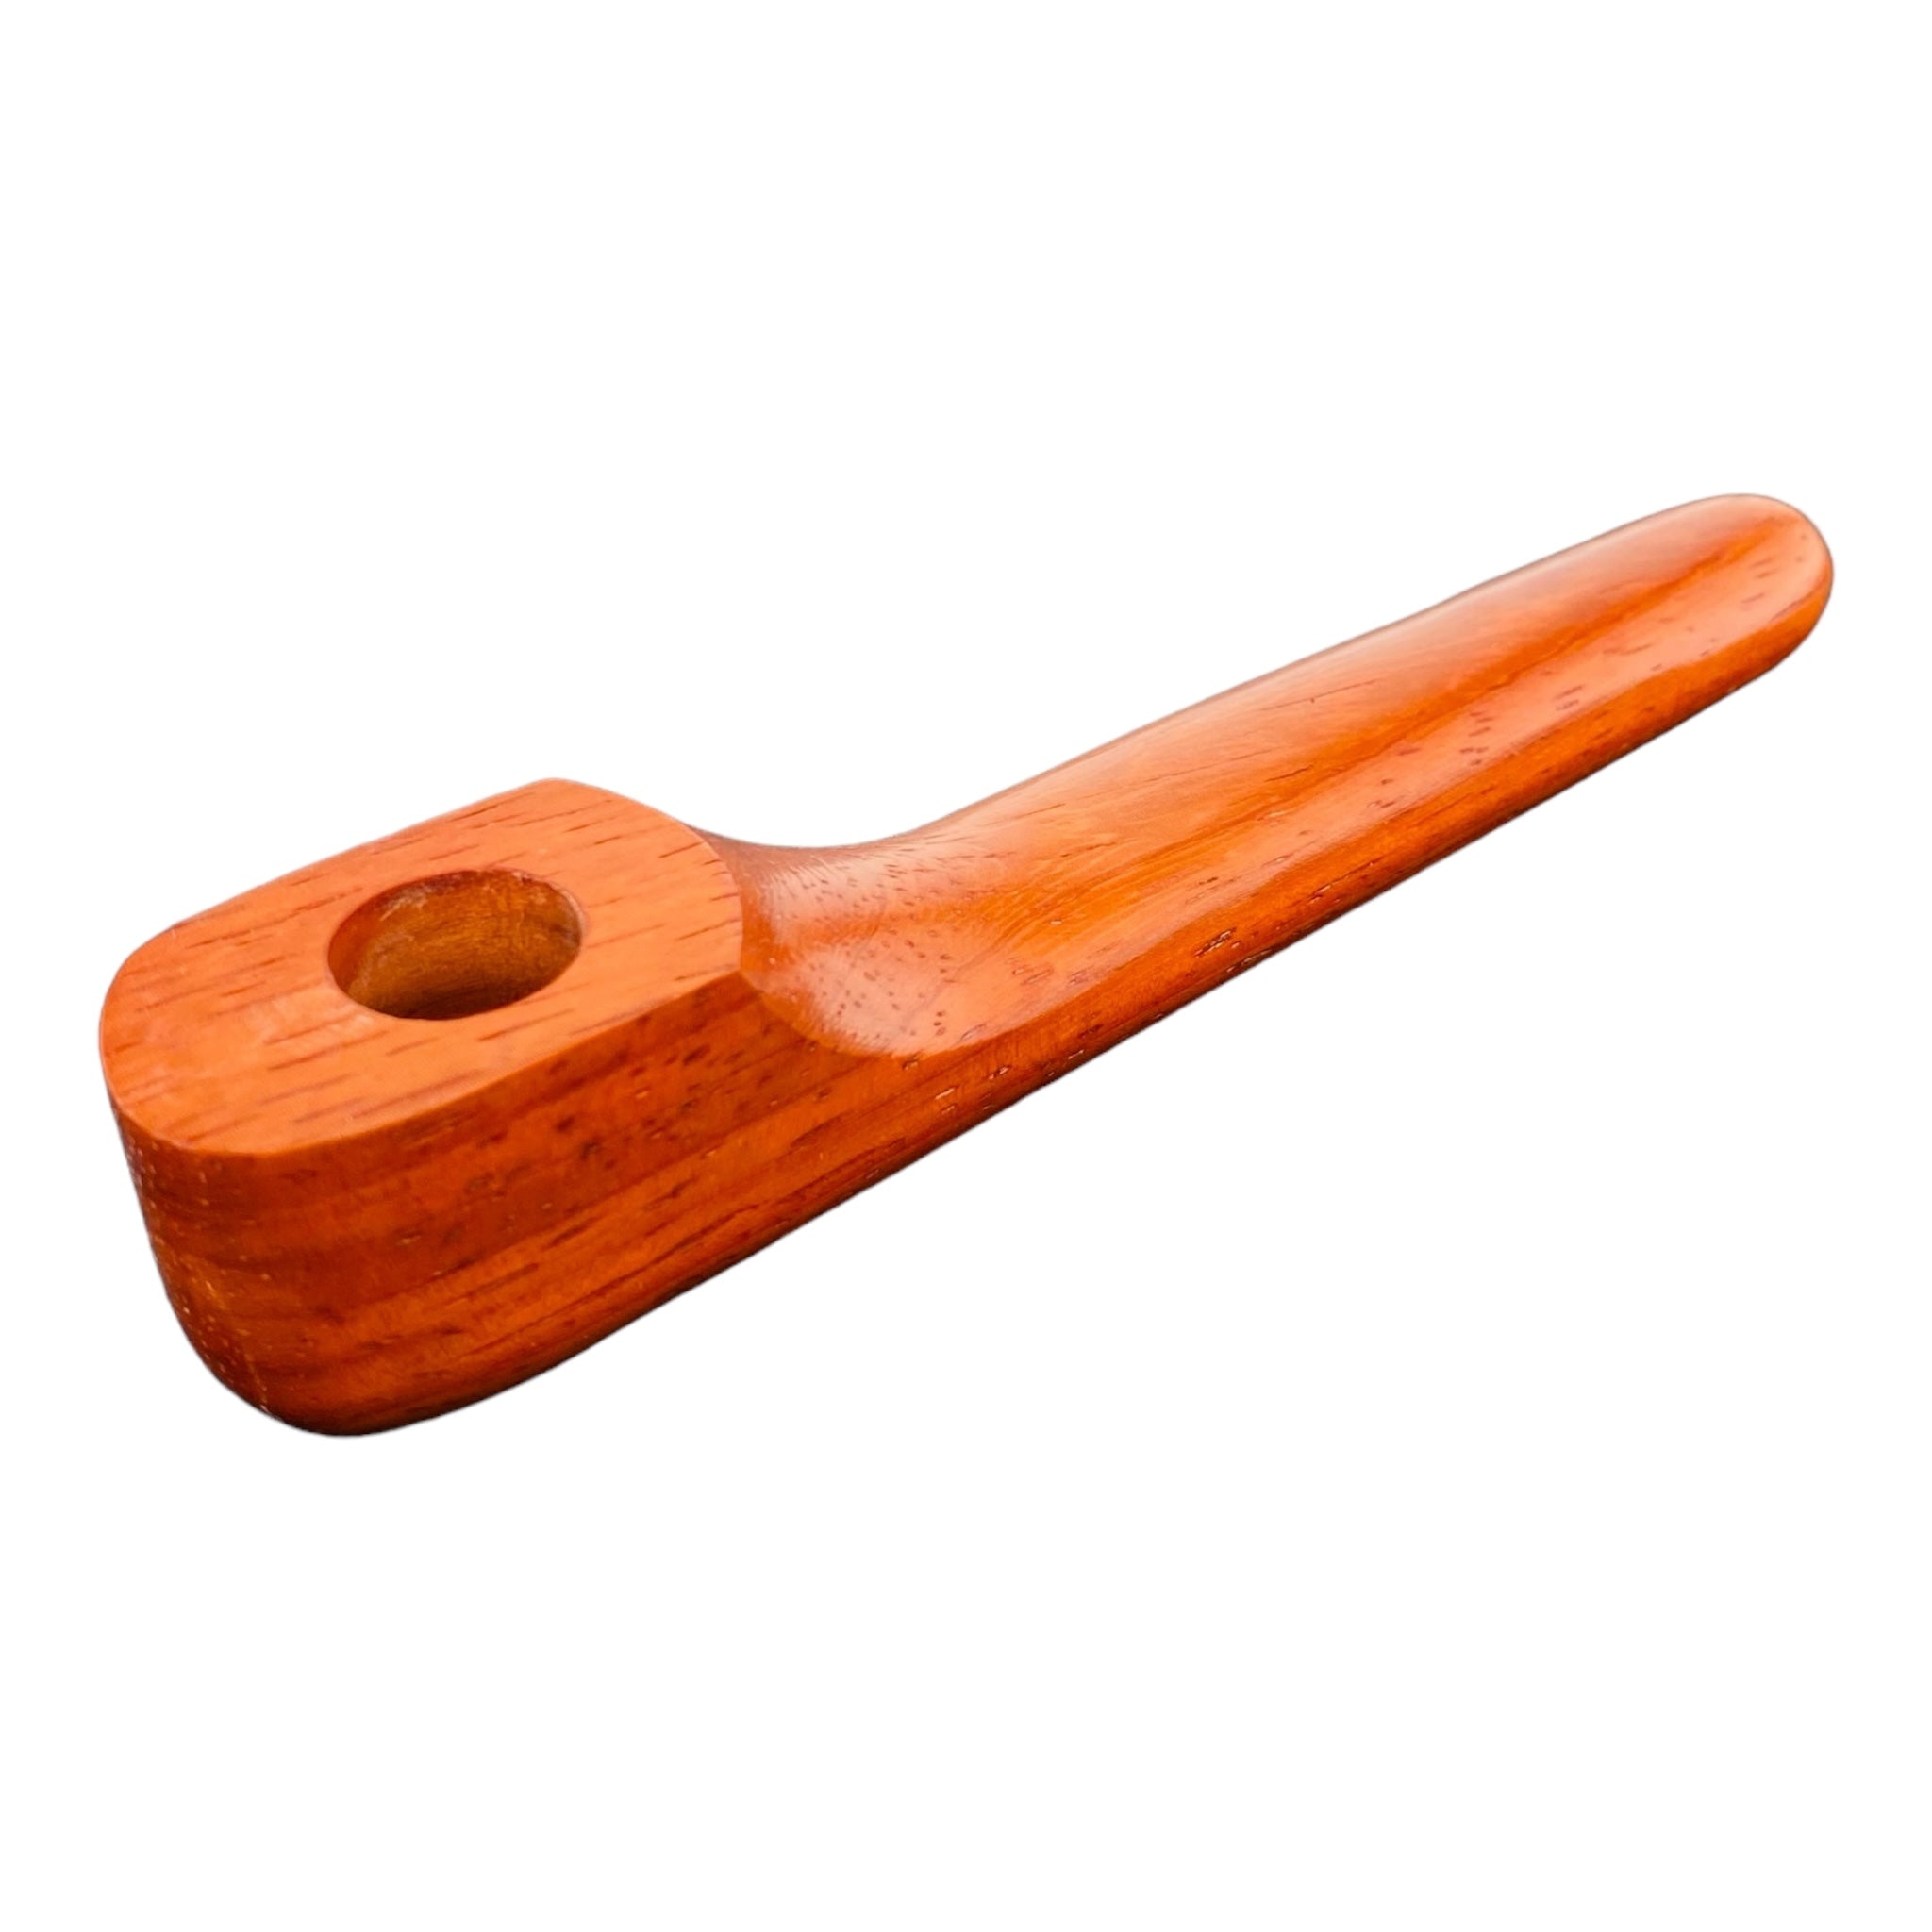 Wood Hand Pipe - 6 Inch Long Stem Wood Pipe Made From Mahogany